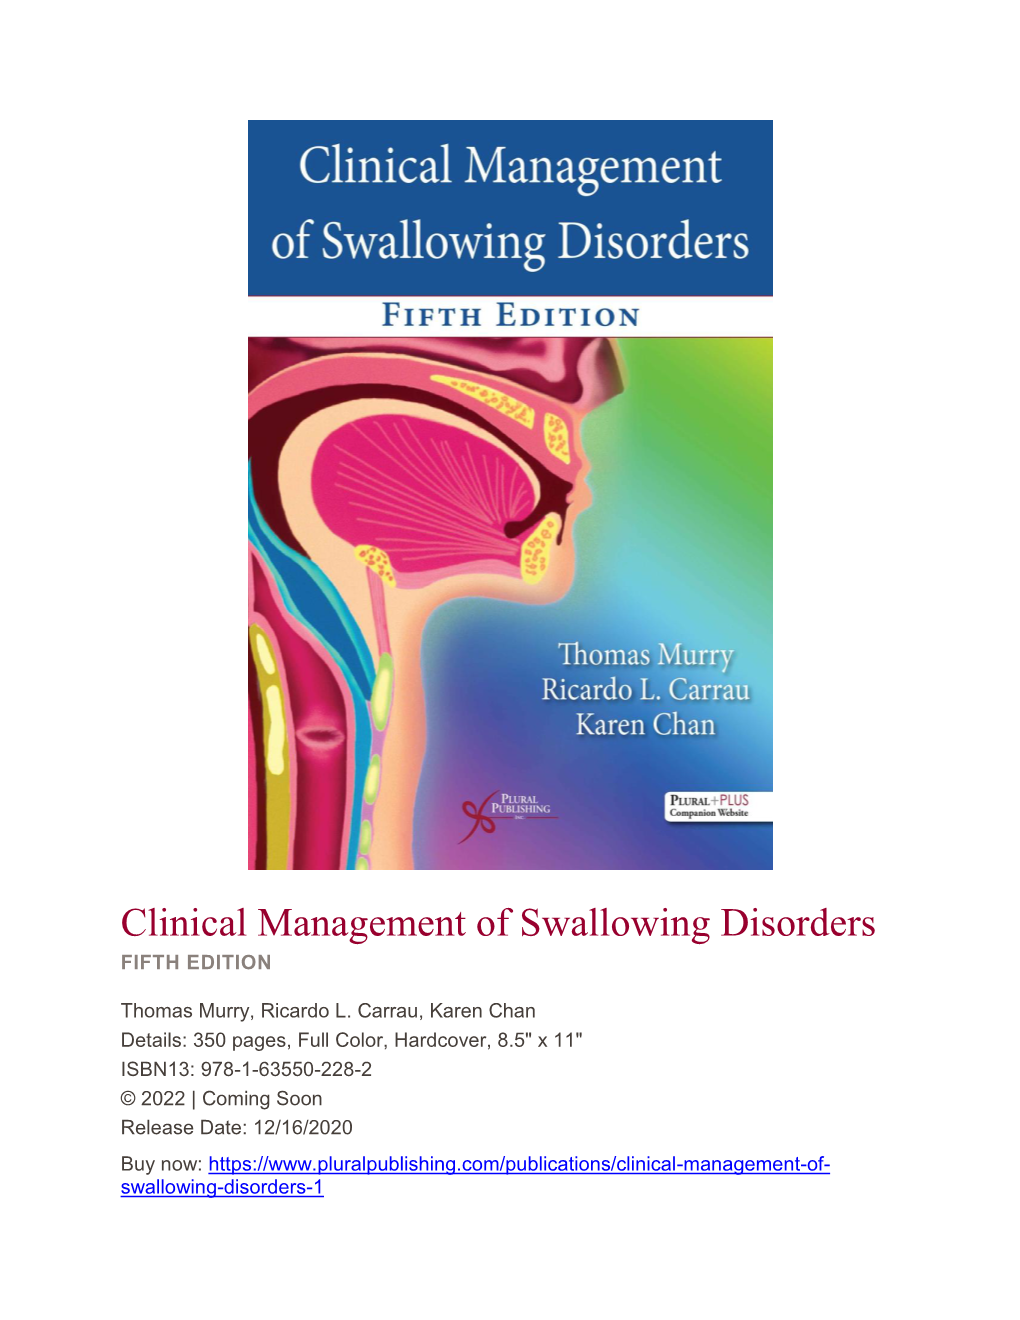 Clinical Management of Swallowing Disorders FIFTH EDITION